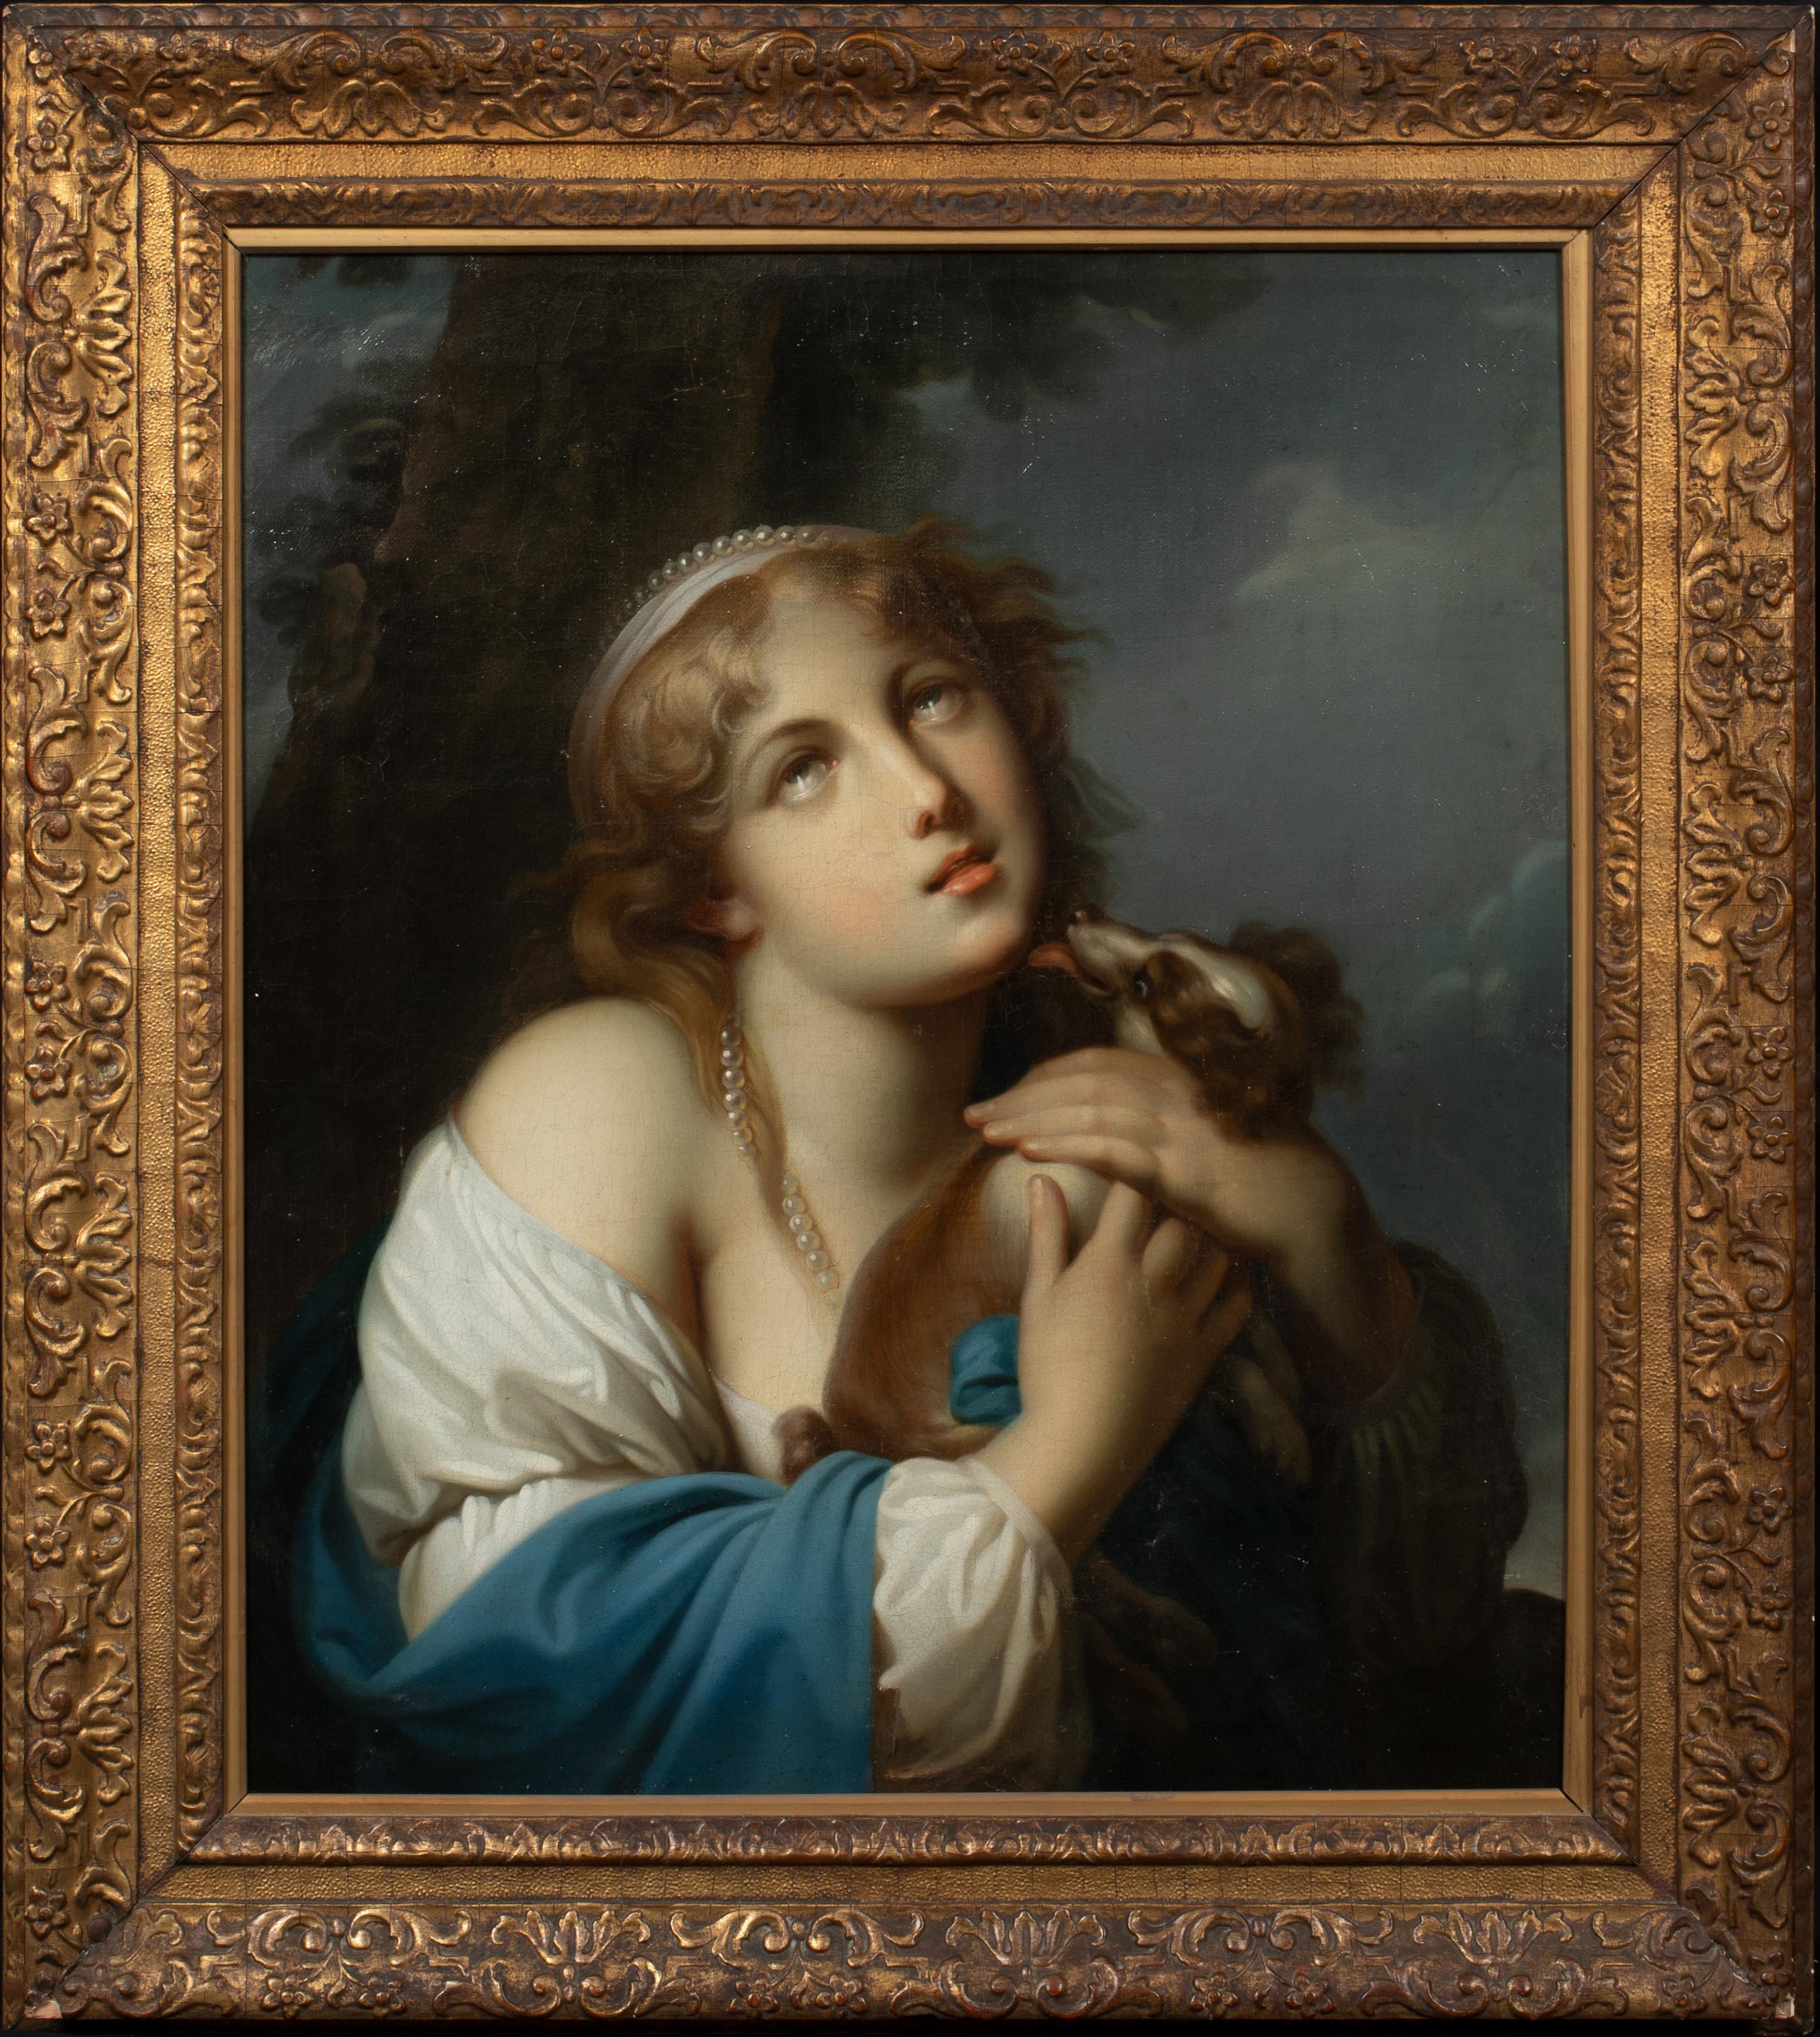 Portrait Of Girl Holding A Spaniel, 18th Century  - Painting by Jean-Baptiste Greuze